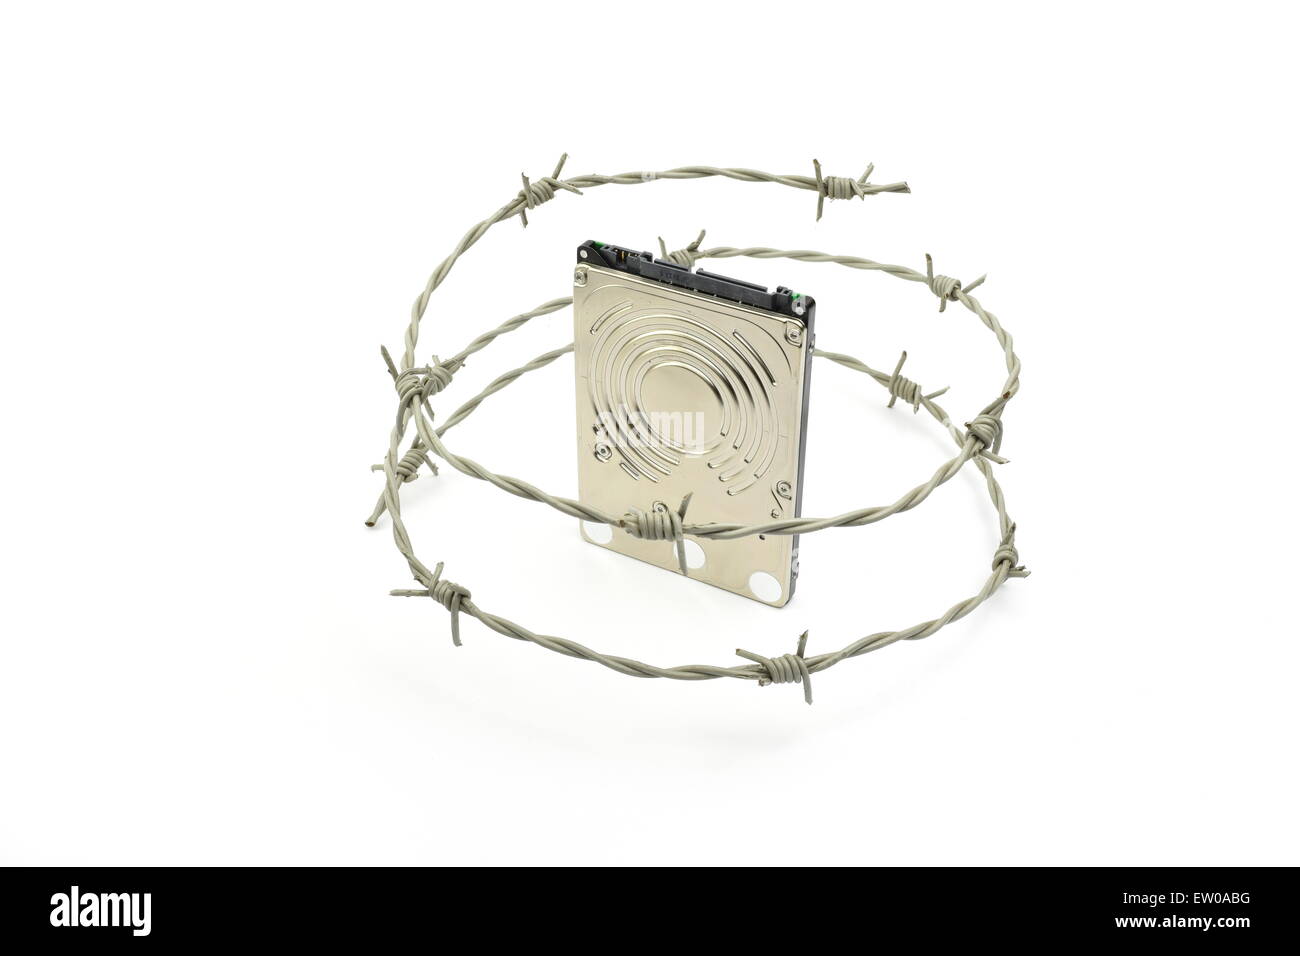 Harddisk behind barbwire - illustration of data security concept. Stock Photo